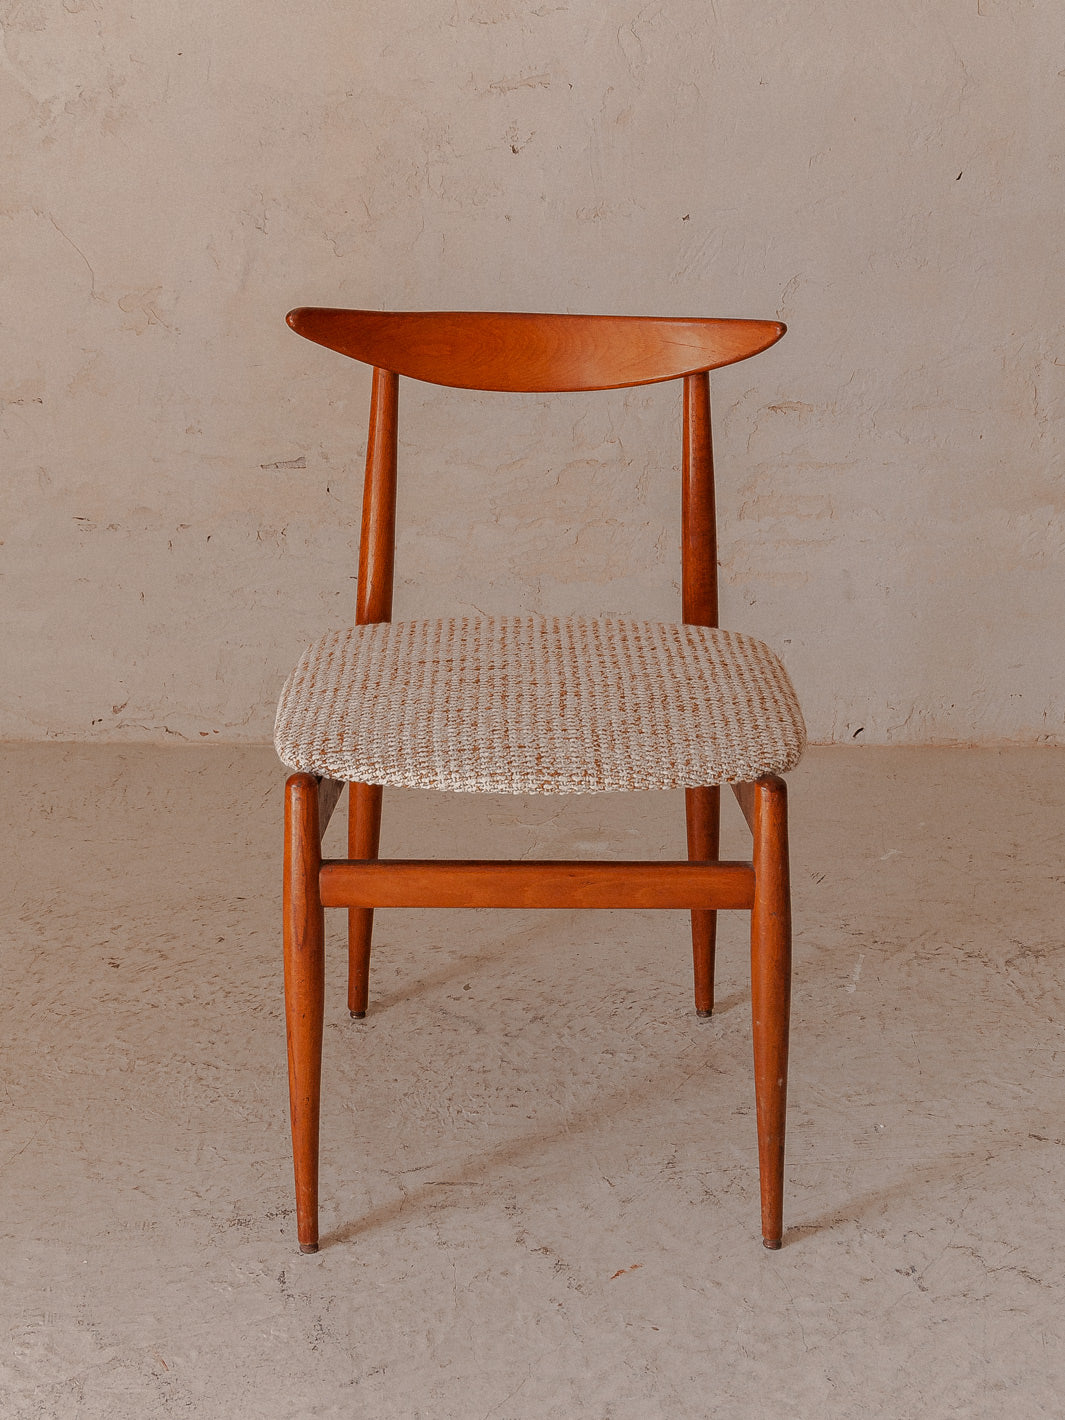 Set of 5 Danish chairs from the 60s